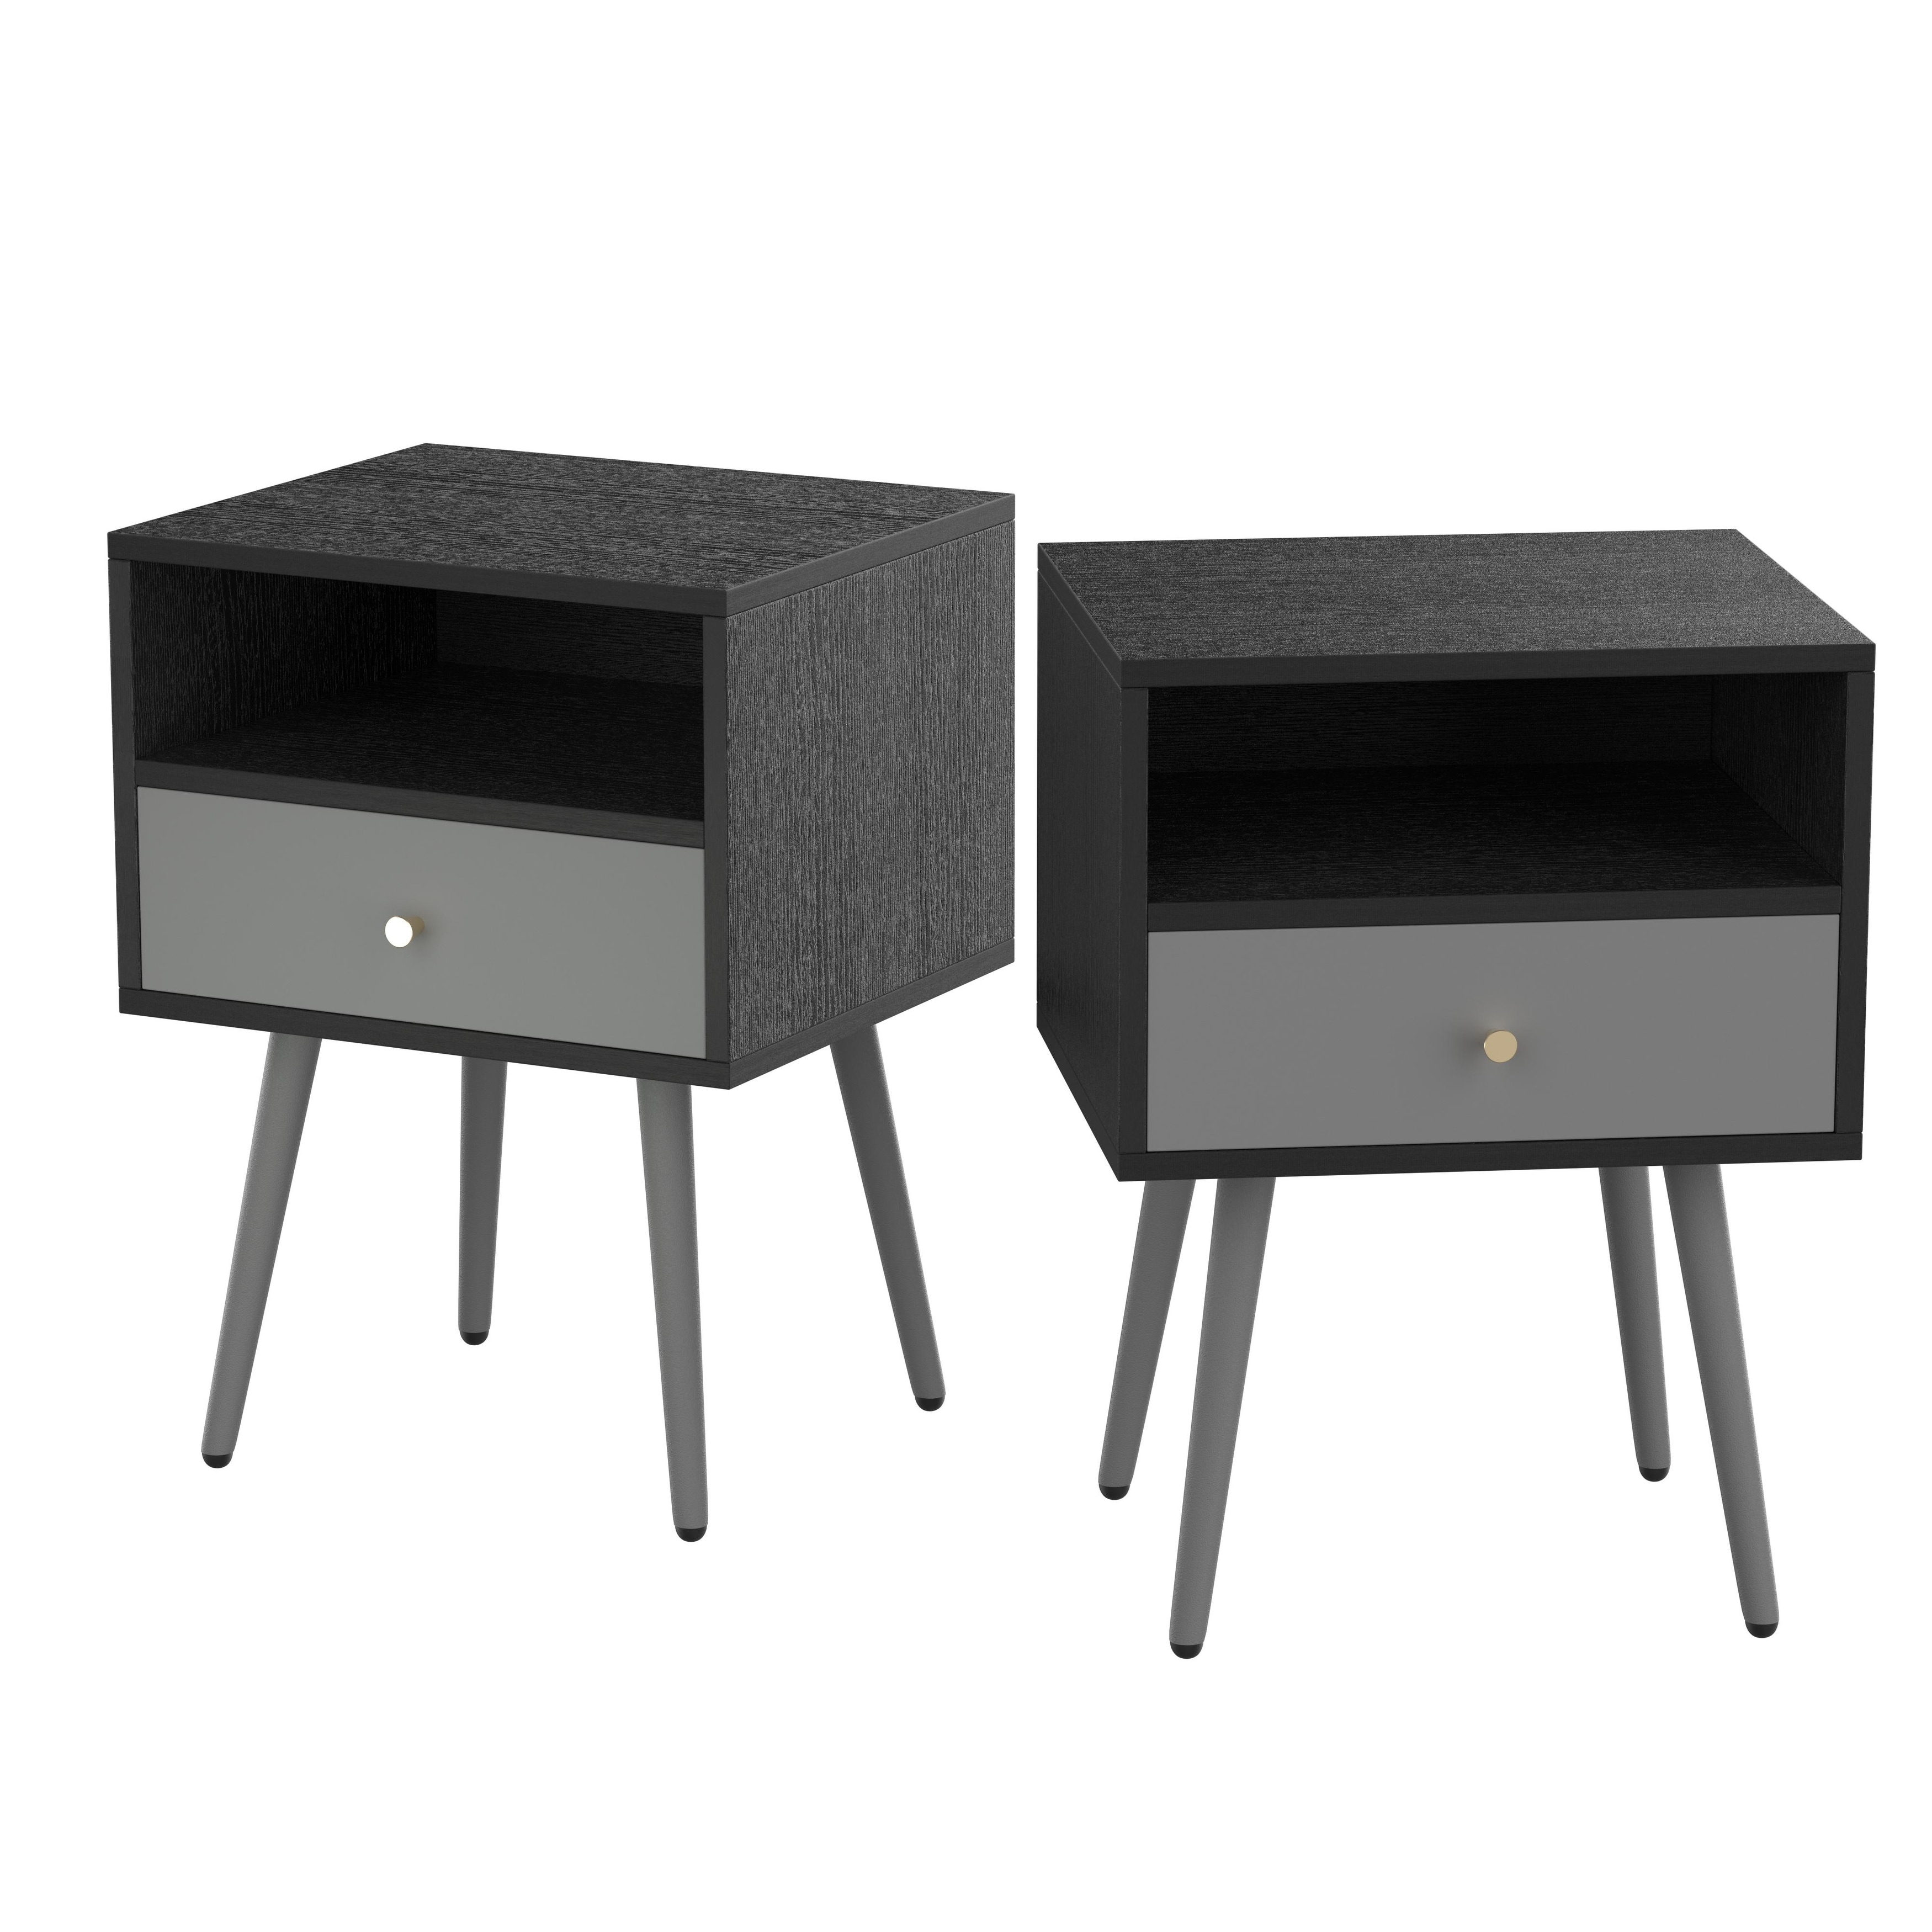 EHEK Modern Bedside Tables Set of 2,Nightstand with 1 Storage Drawer Chic Sofa Table for bedroom living room office